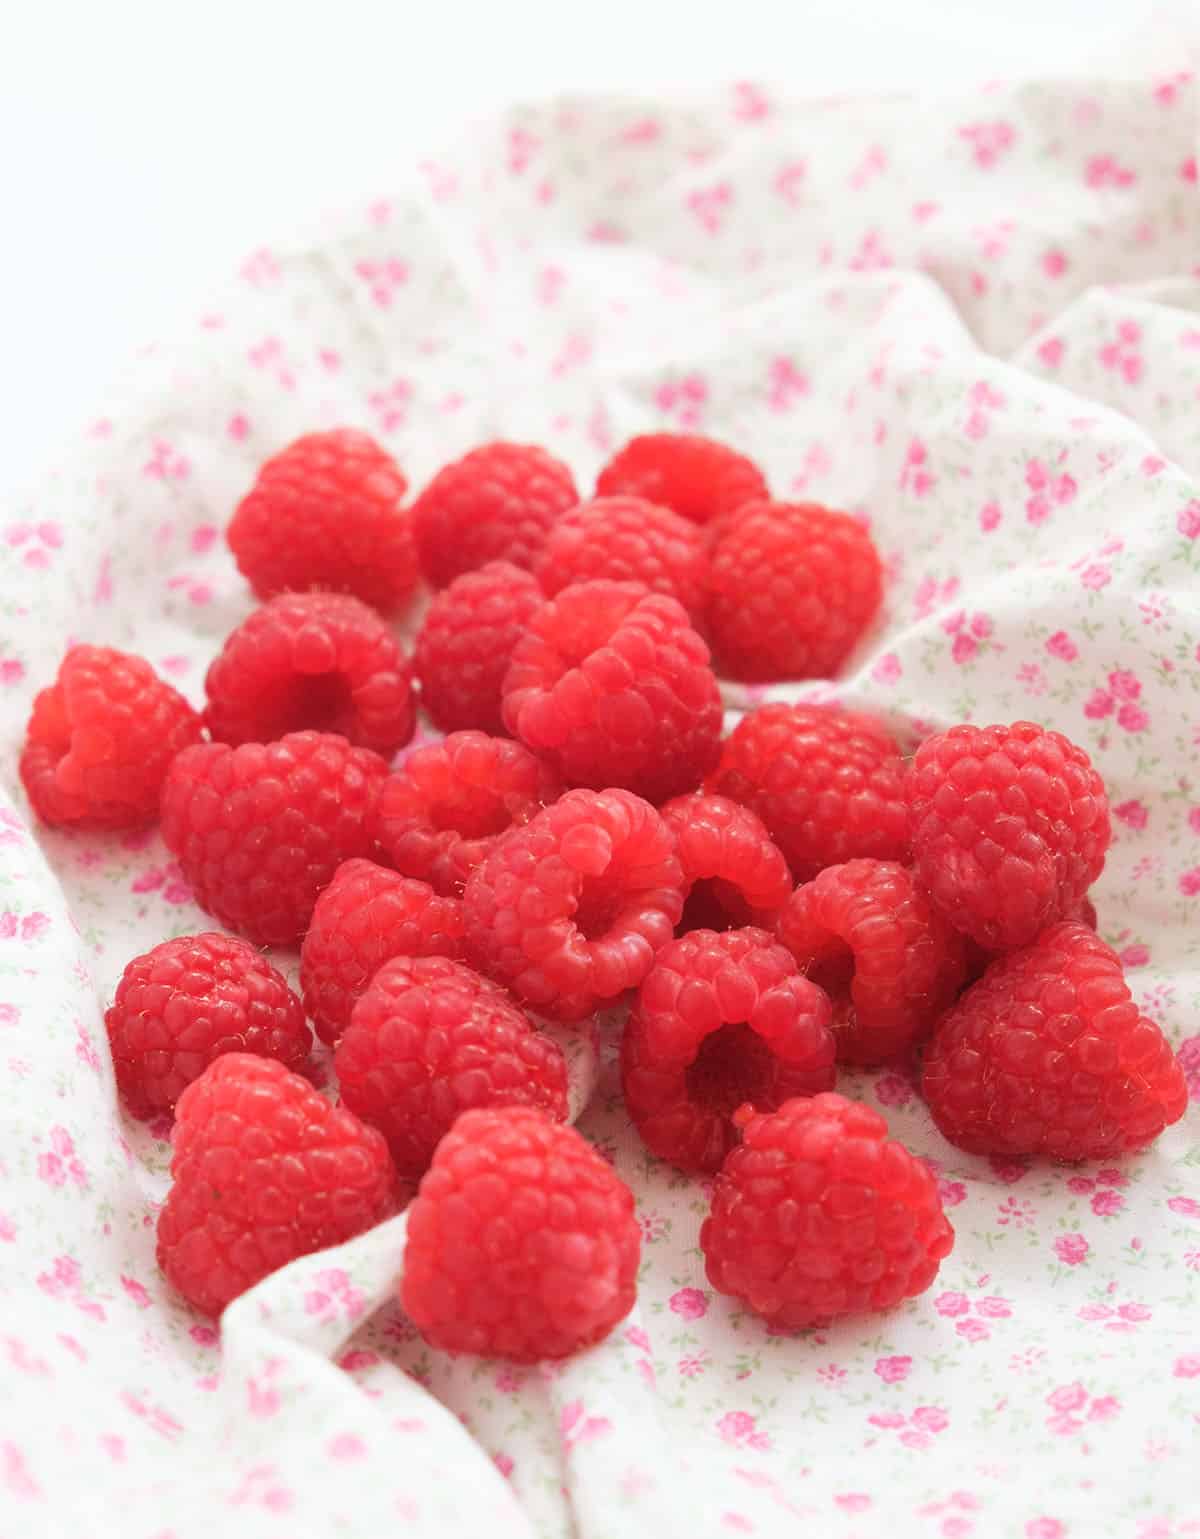 Close-up of a handful of fresh raspberries on a white tea towel decorated with small pink flowers.